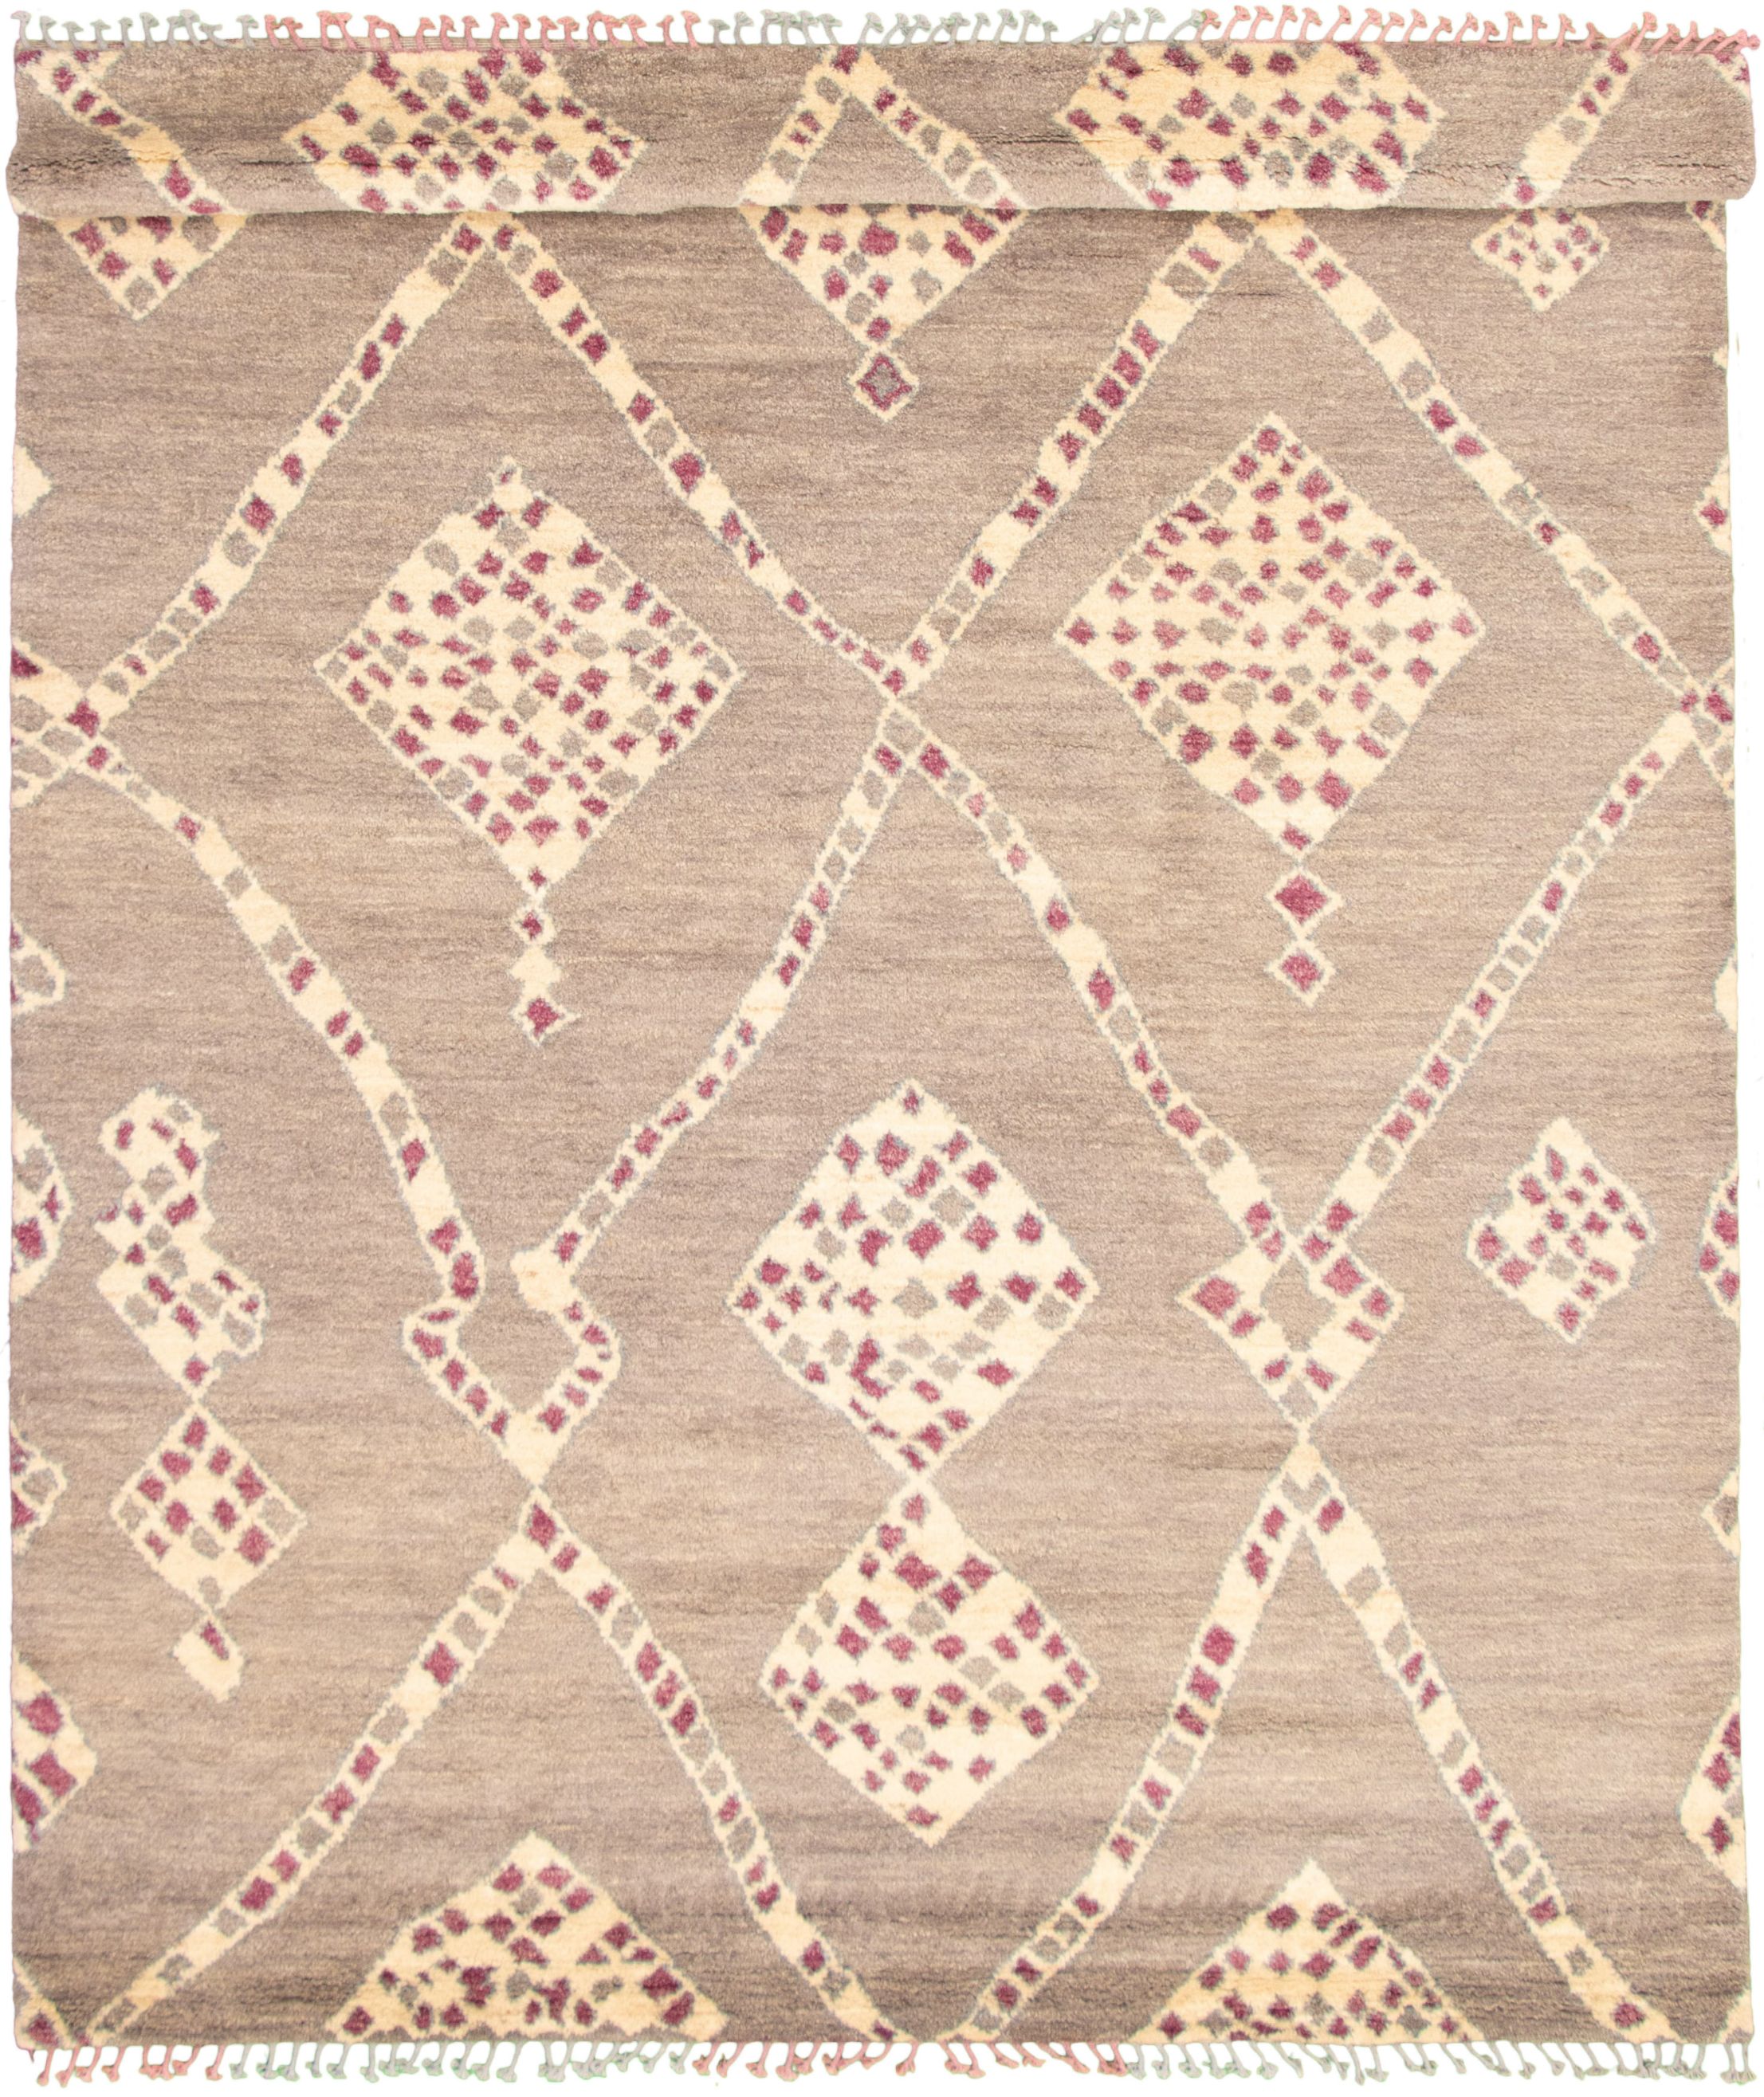 Hand-knotted Marrakech Grey  Rug 9'1" x 12'6" Size: 9'1" x 12'6"  